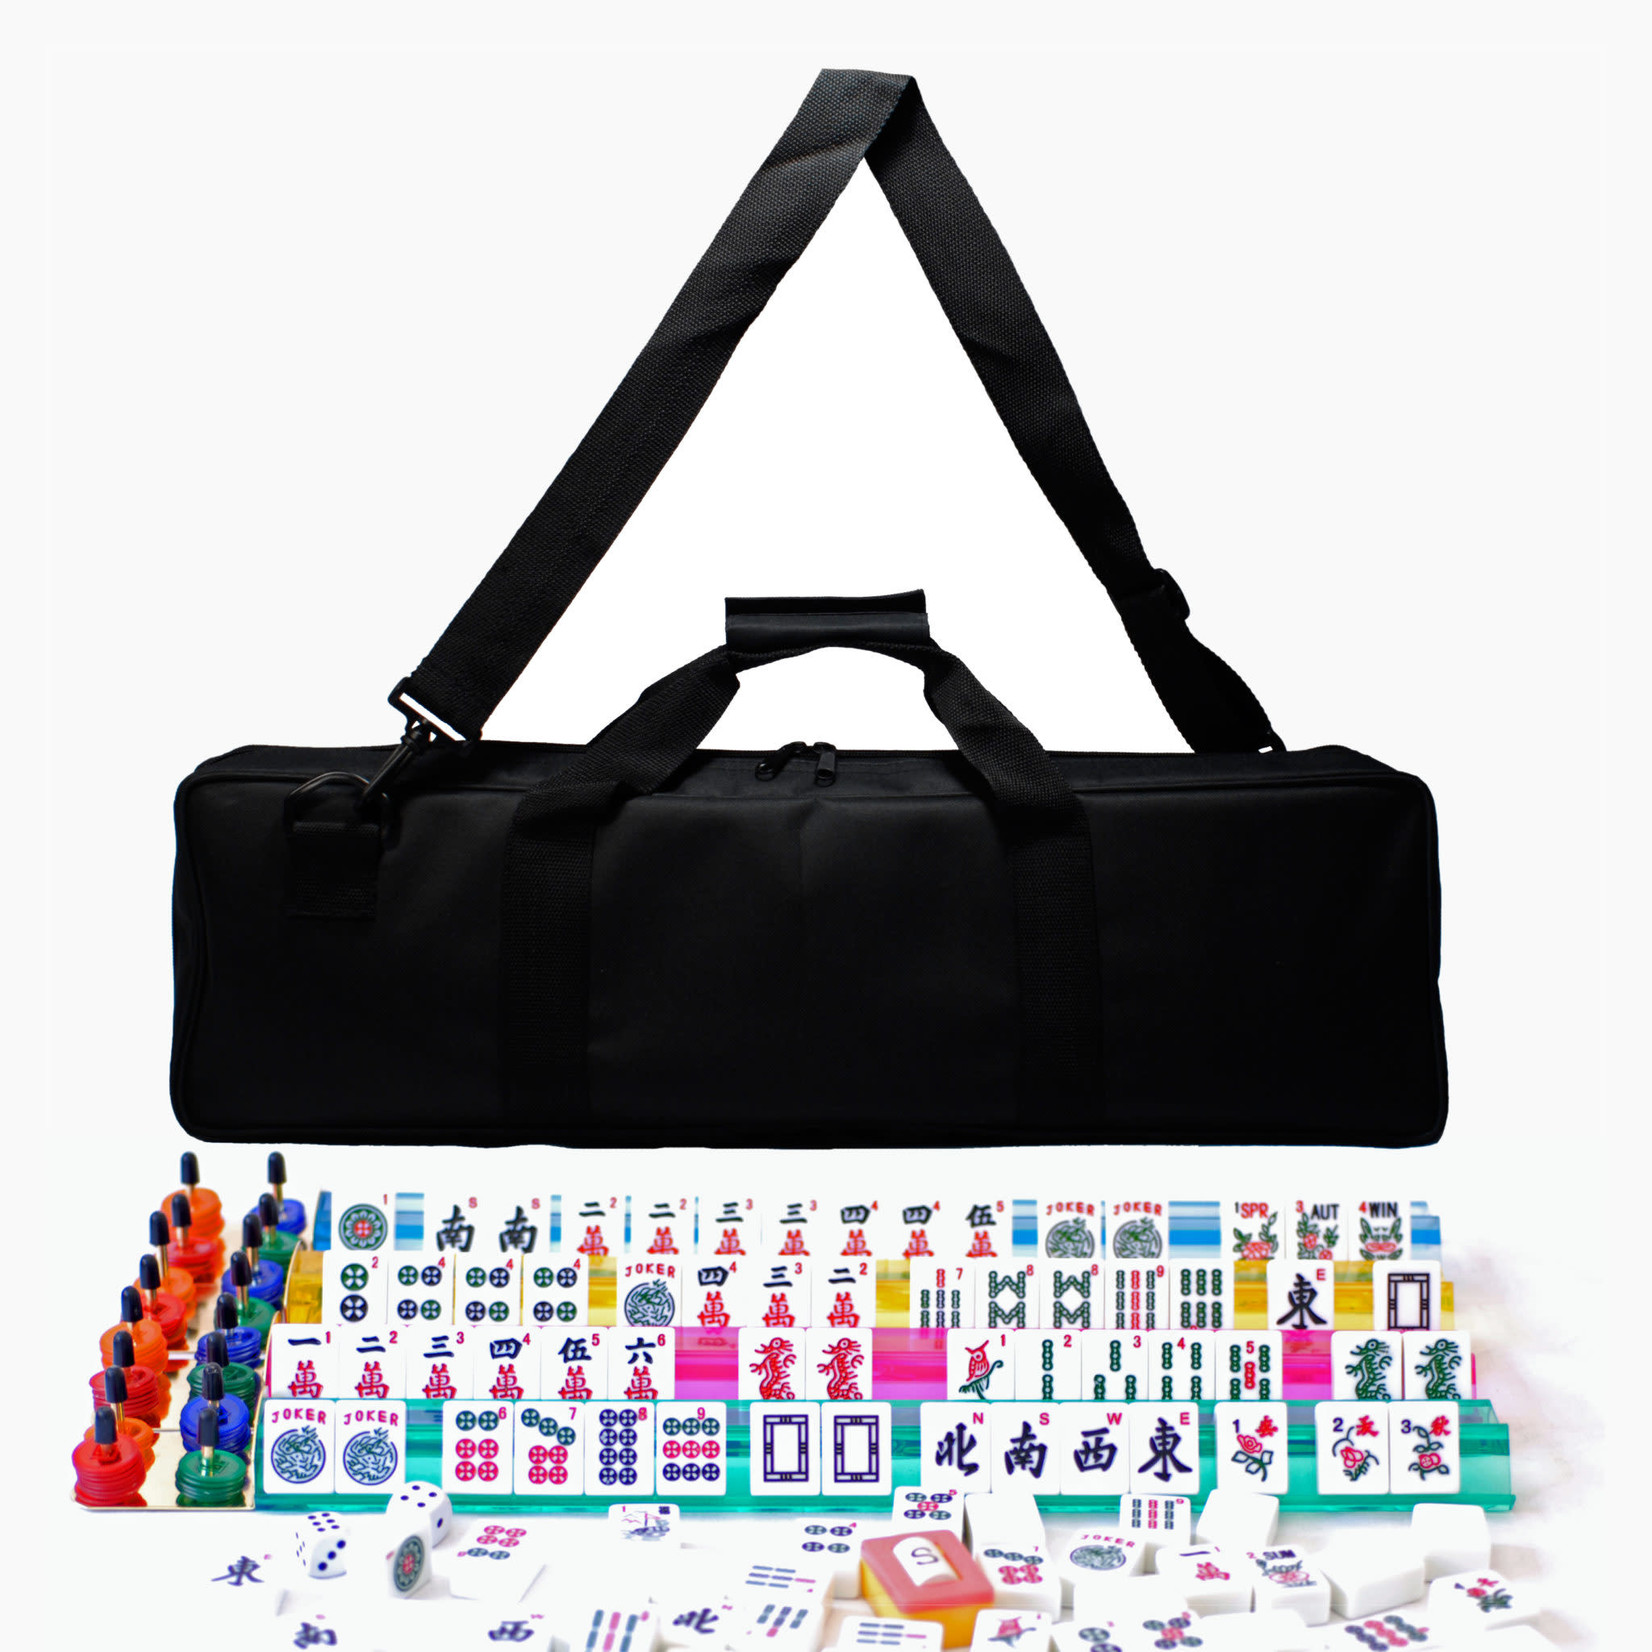 Wood Expressions American Mahjong in Canvas Bag